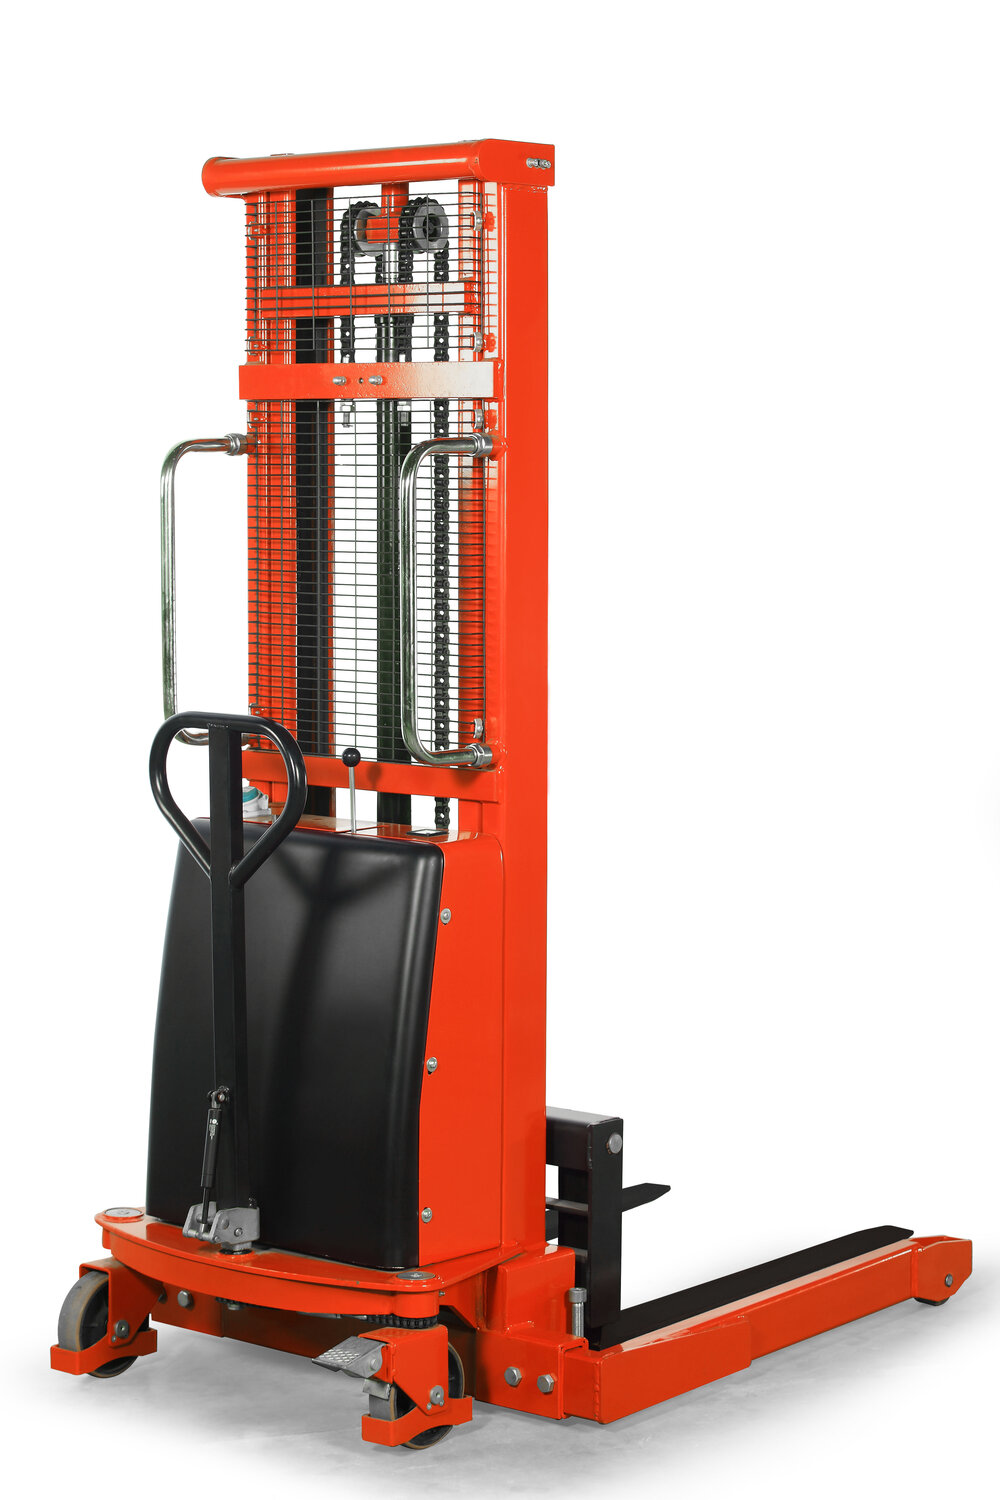 SOVANS Semi-Electric Pallet Jack Stacker Straddle Lifter 3300lbs Capacity 63 Lifting Height with Adj Forks Material Lift 